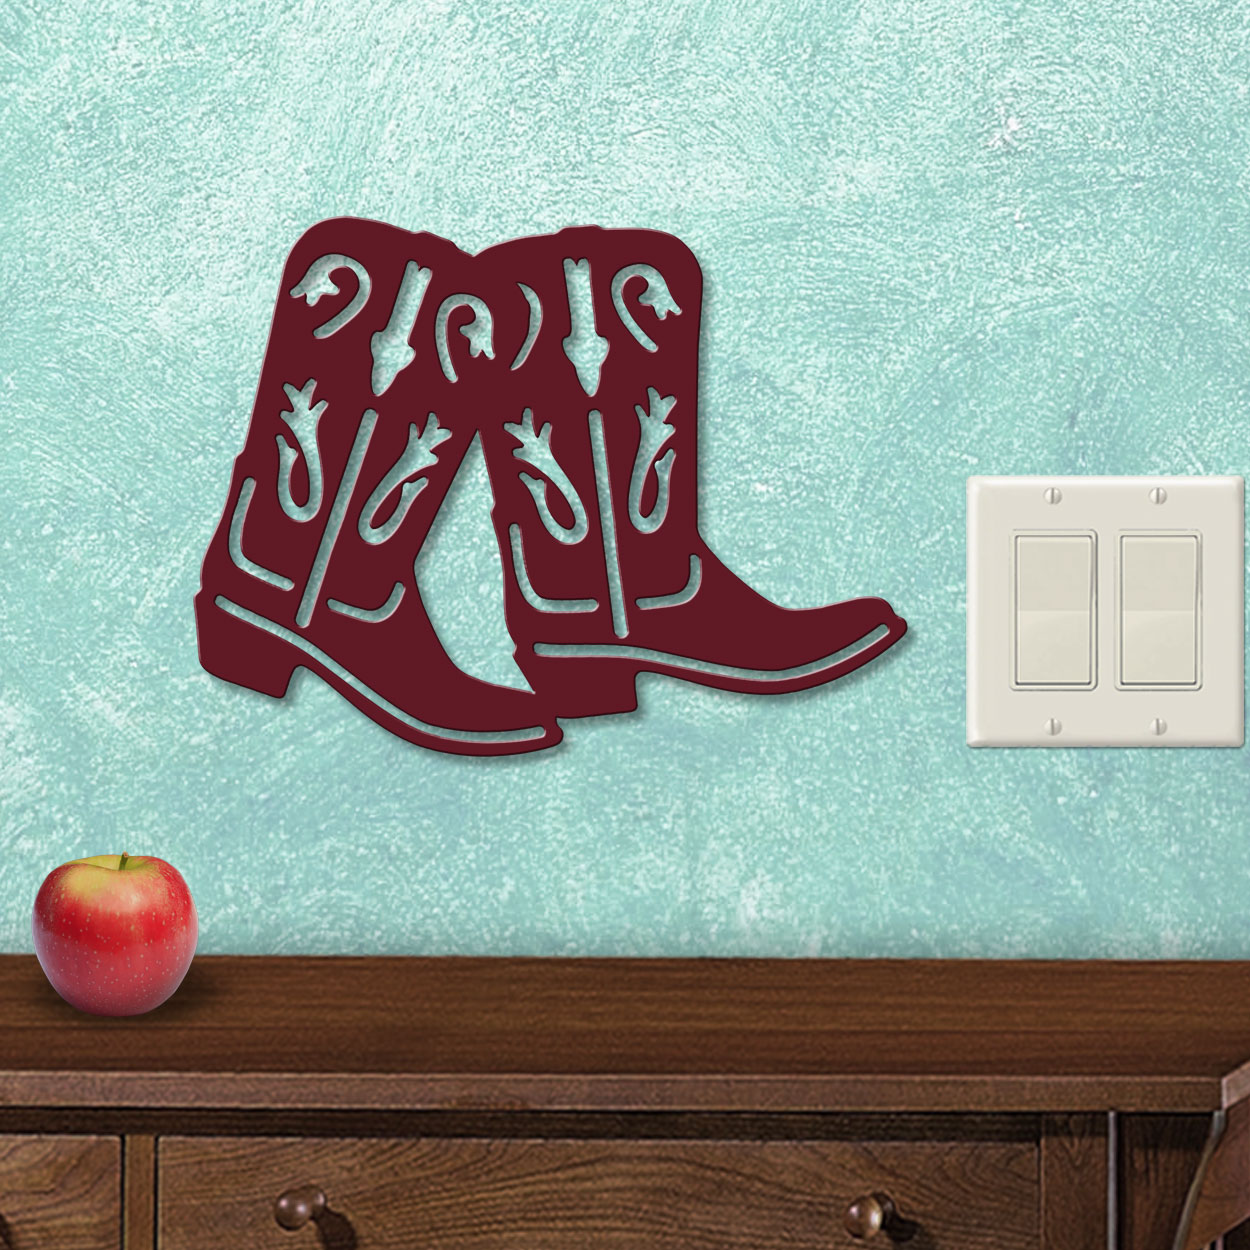 625005S - Boots Western Decor Small 12in Wall Art - Choose Color